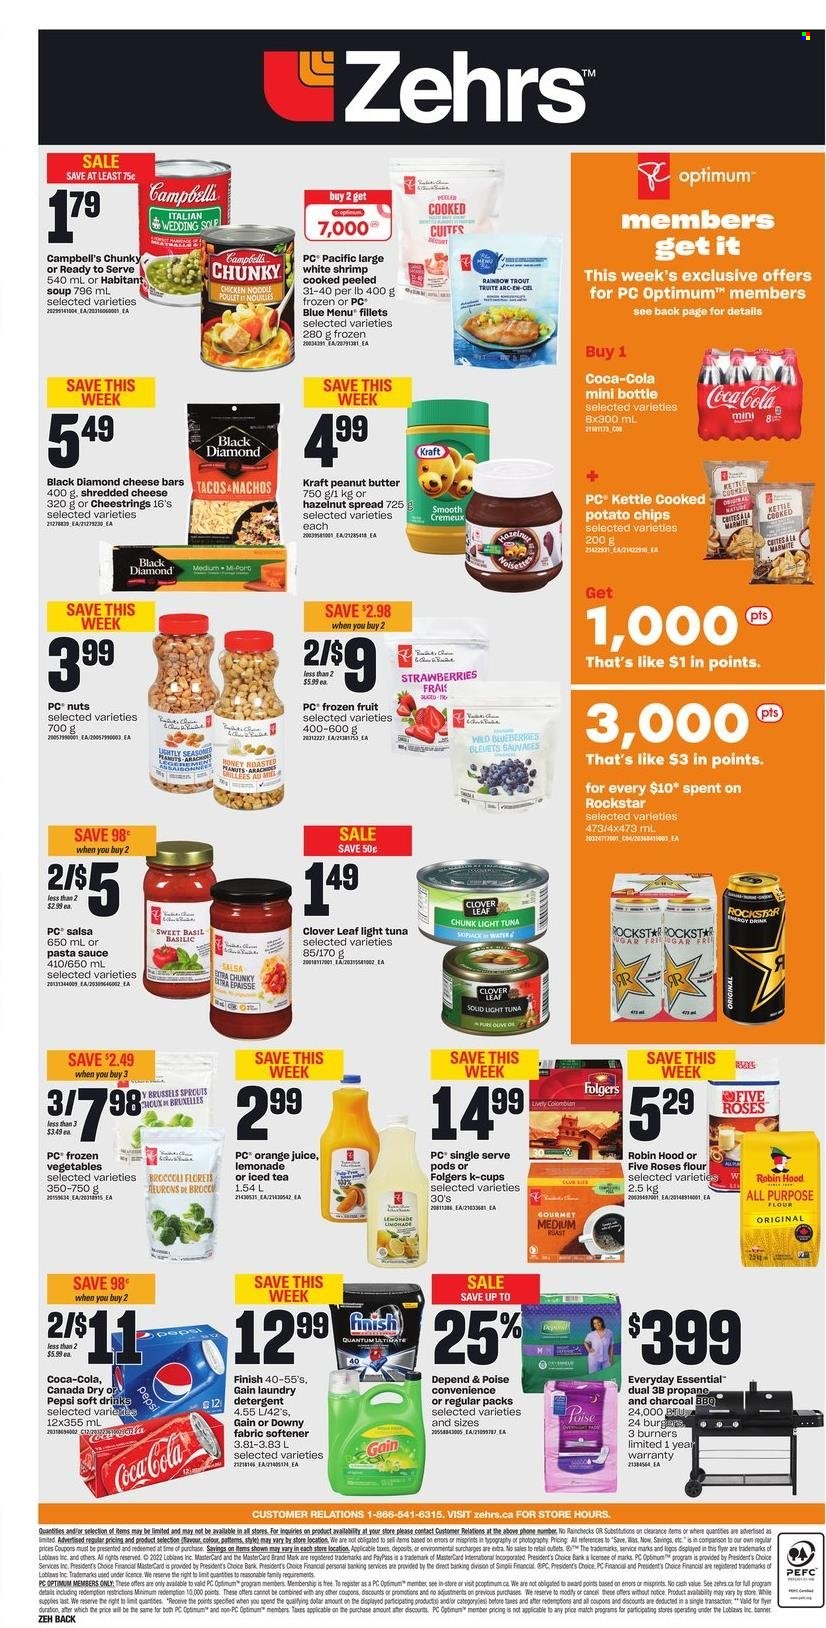 thumbnail - Zehrs Flyer - May 12, 2022 - May 18, 2022 - Sales products - tacos, strawberries, trout, tuna, shrimps, Campbell's, pasta sauce, soup, hamburger, sauce, noodles, Kraft®, shredded cheese, string cheese, Président, Clover, frozen vegetables, potato chips, light tuna, esponja, salsa, peanut butter, hazelnut spread, Canada Dry, Coca-Cola, lemonade, Pepsi, orange juice, juice, ice tea, soft drink, Rockstar, Folgers, coffee capsules, K-Cups, Gain, fabric softener, Downy Laundry, Finish Powerball, Finish Quantum Ultimate, Optimum, phone, detergent. Page 2.